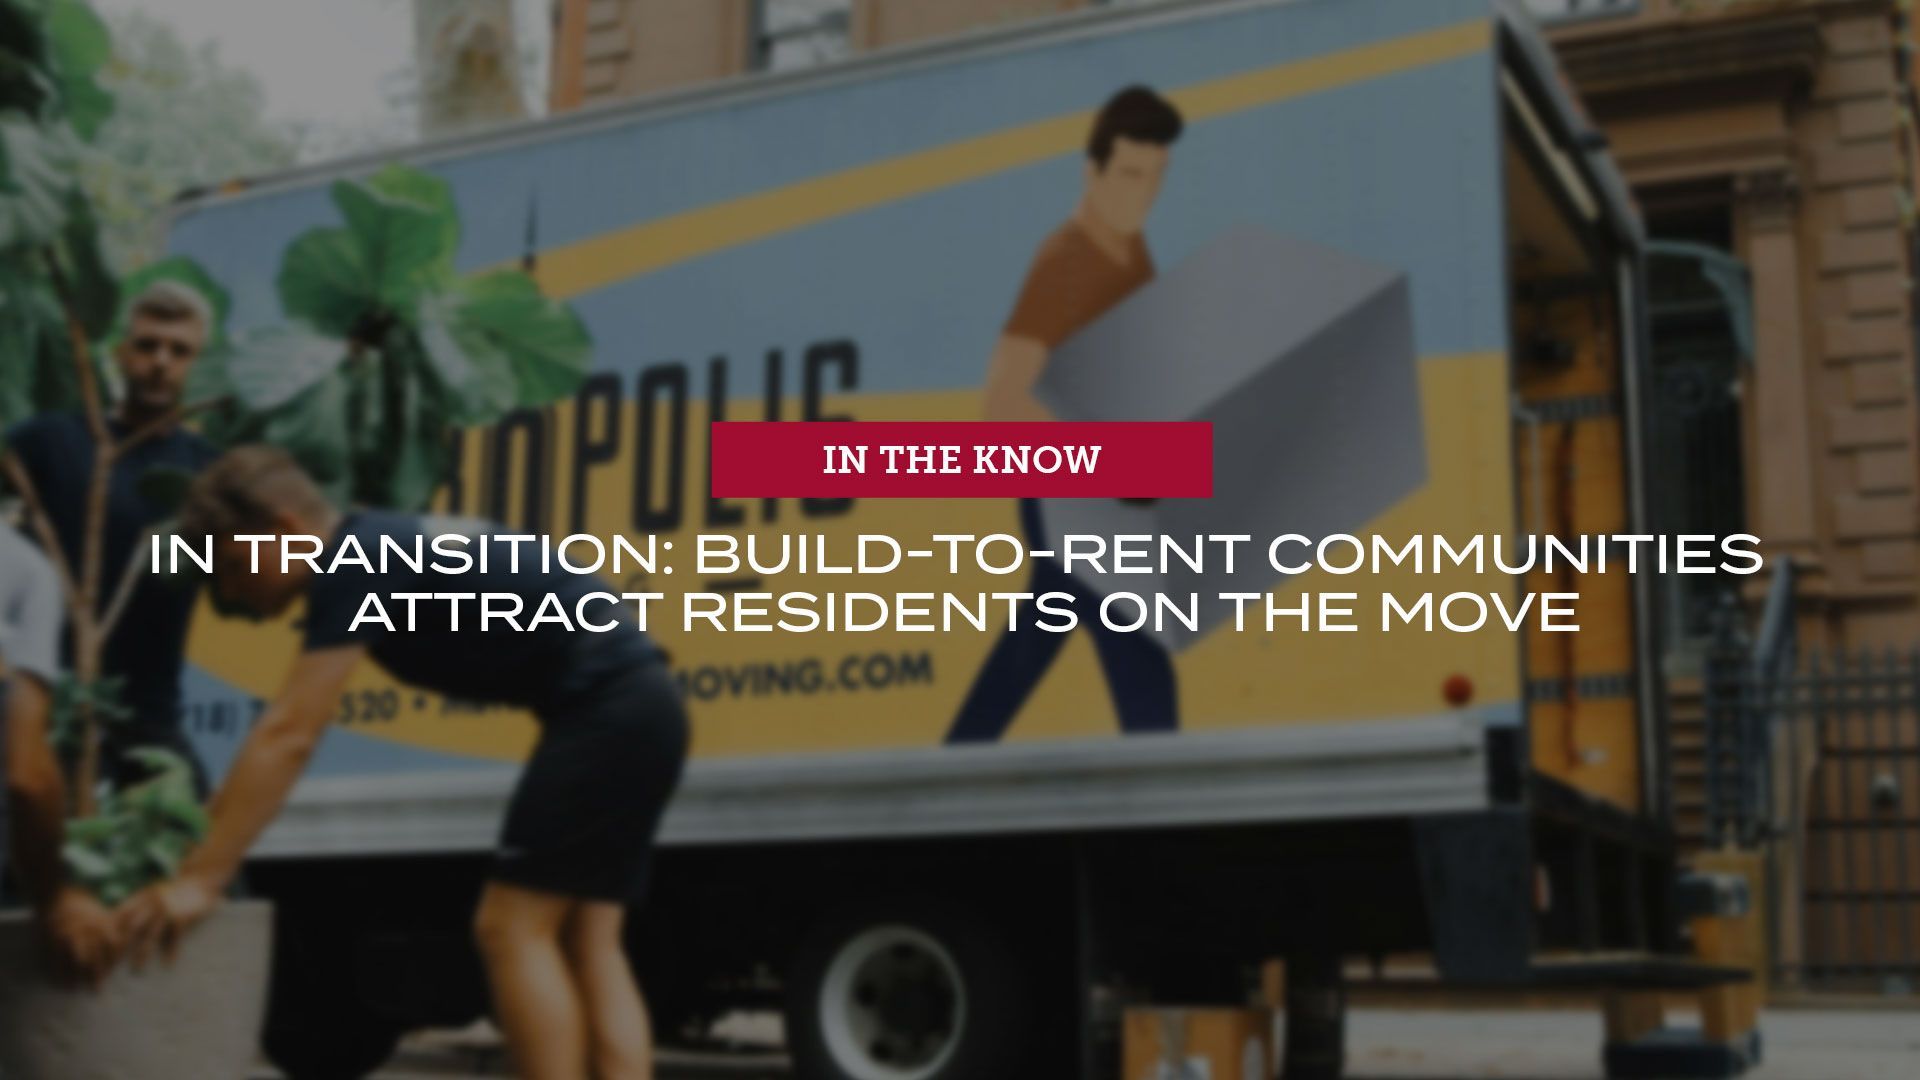 In transition: Build-to-rent communities attract residents on the move